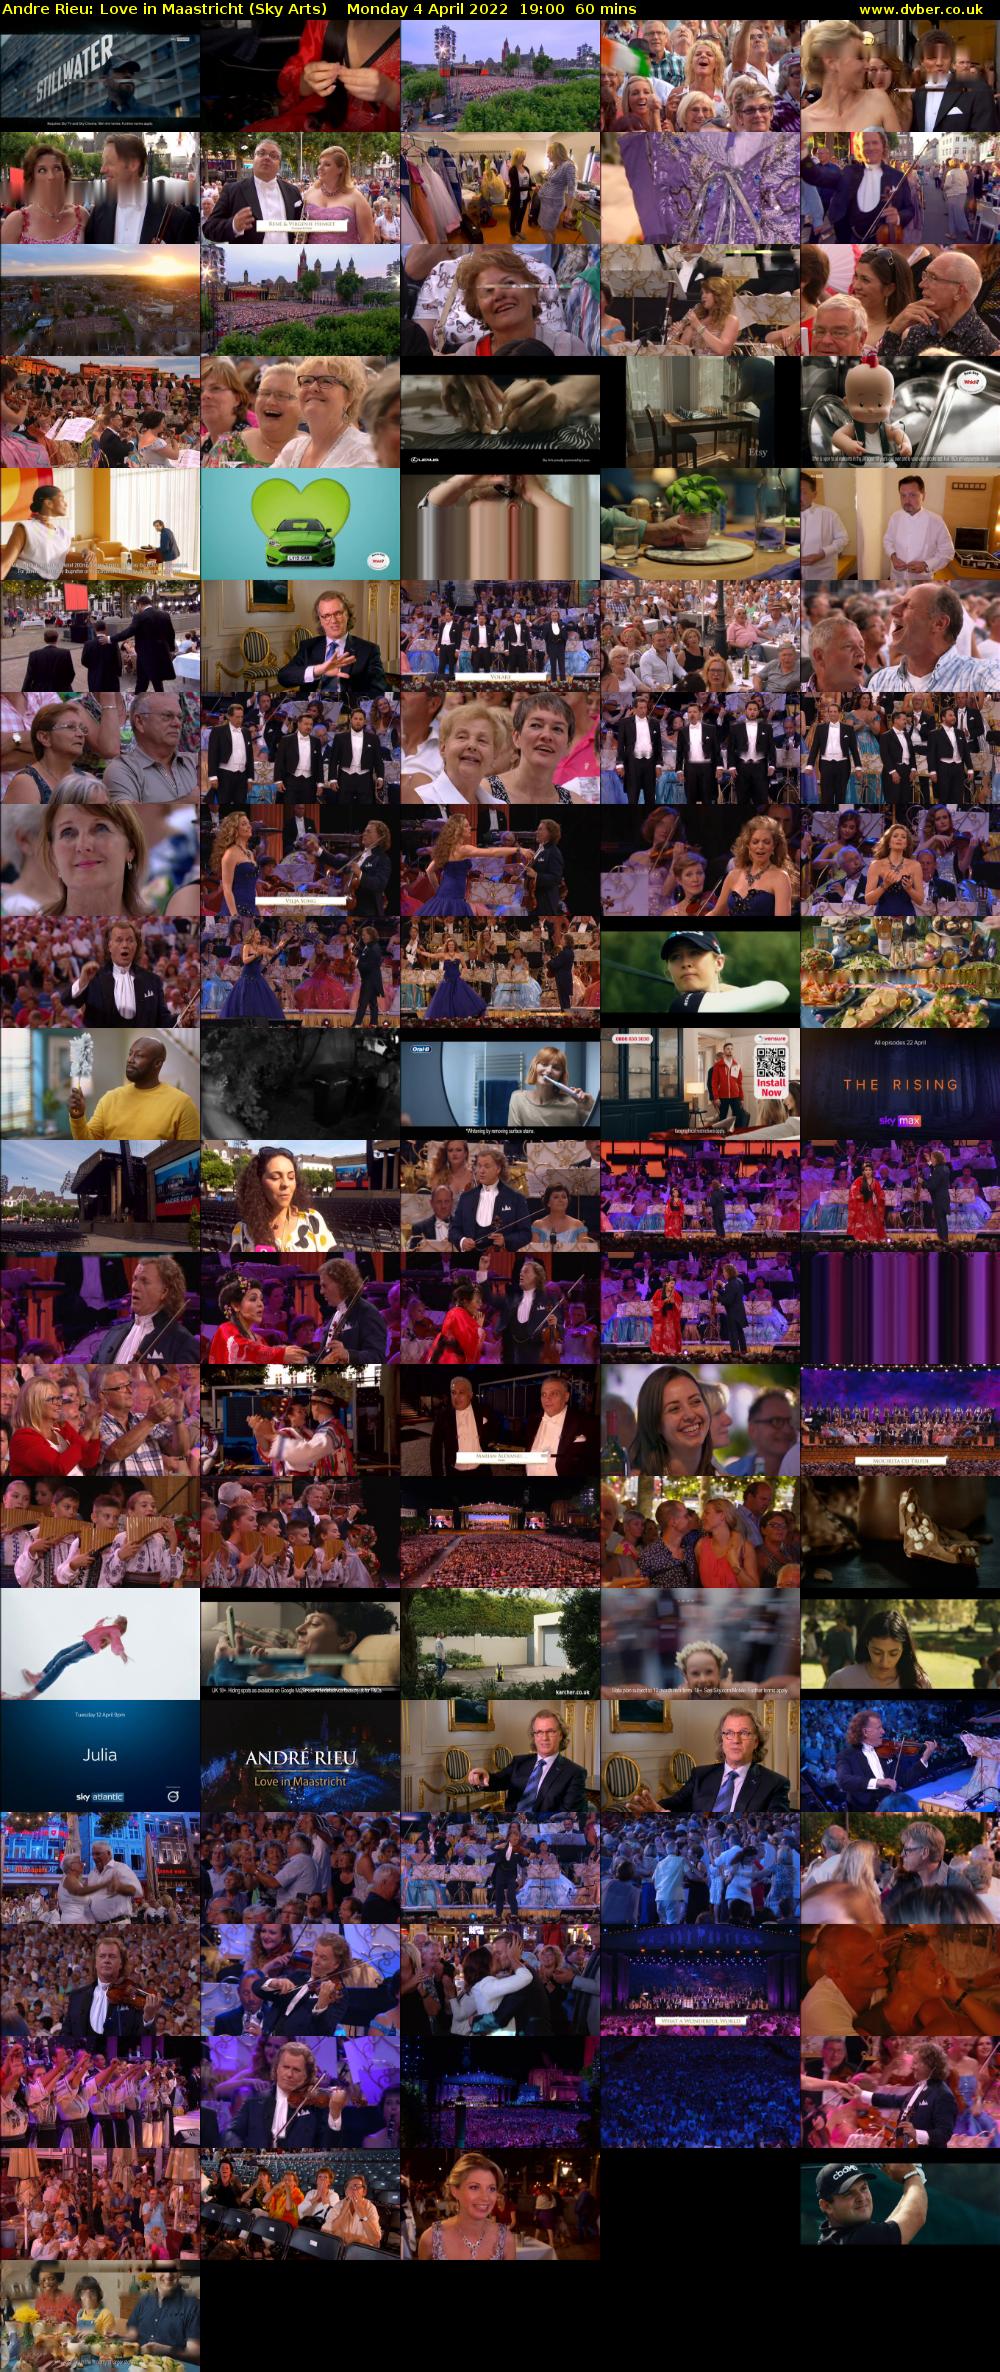 Andre Rieu: Love in Maastricht (Sky Arts) Monday 4 April 2022 19:00 - 20:00